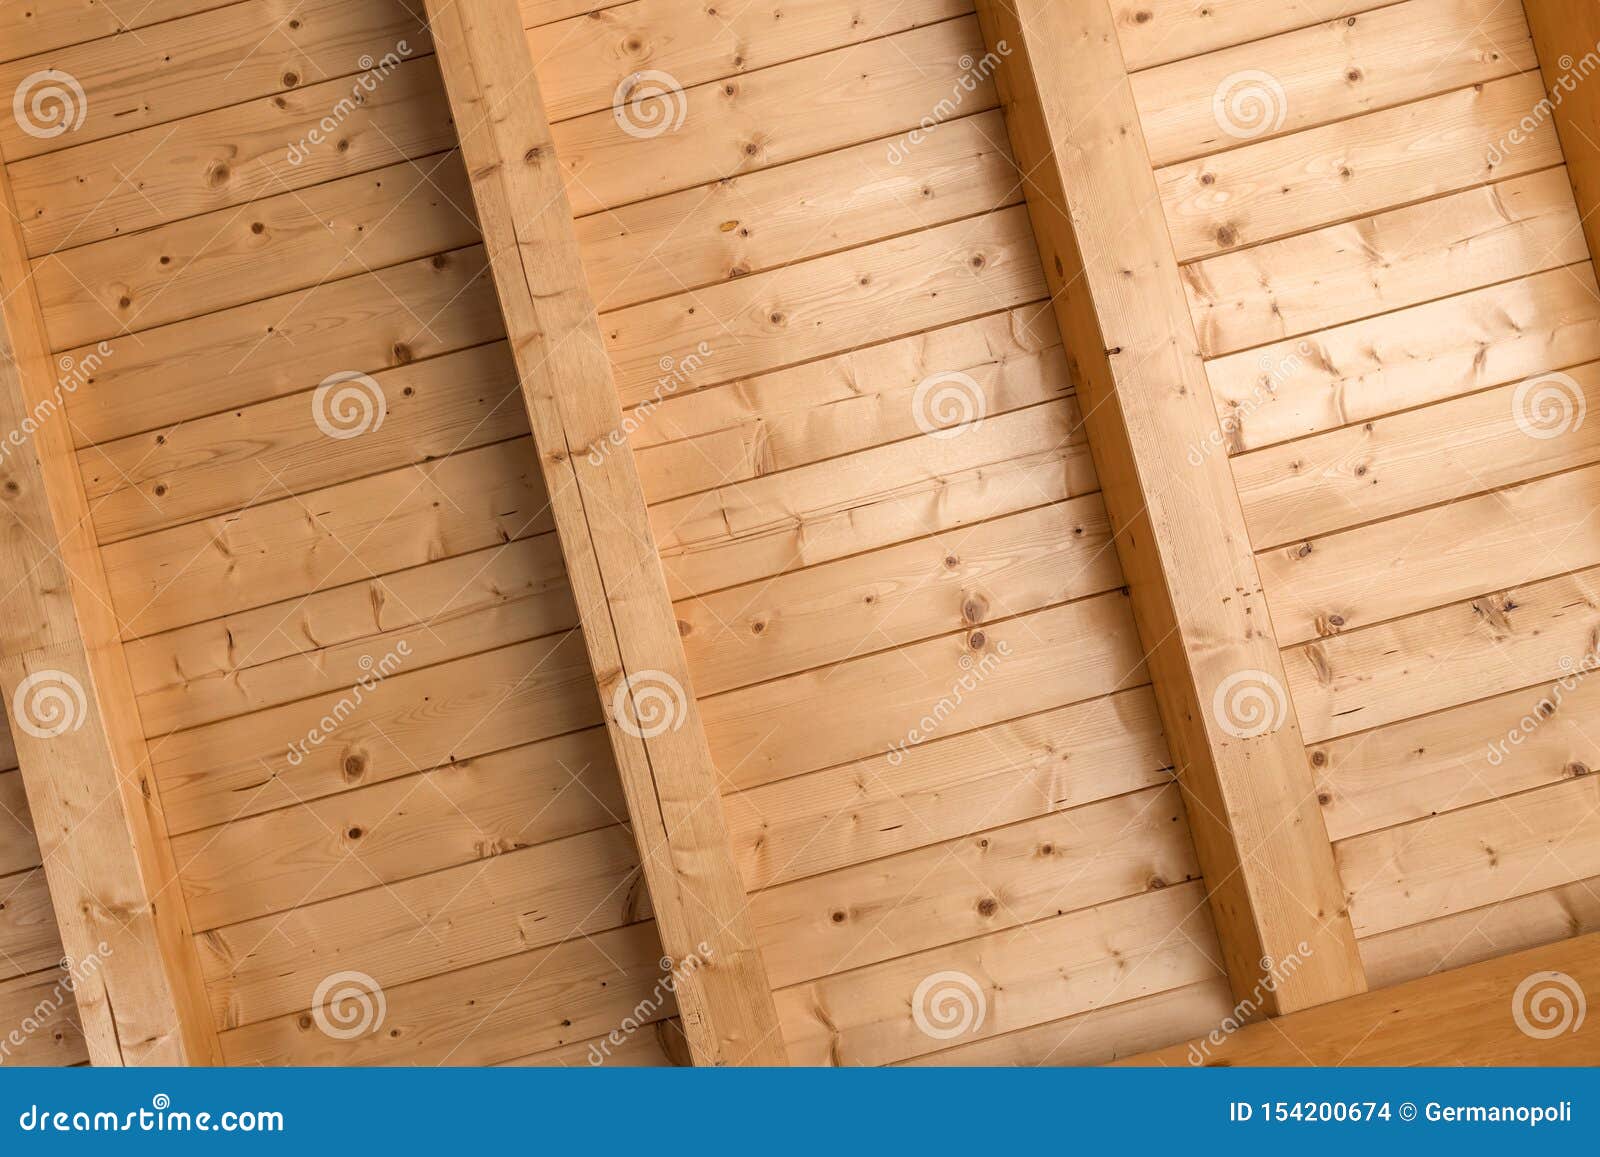 Wooden Ceiling With Exposed Beams Stock Photo Image Of Truss